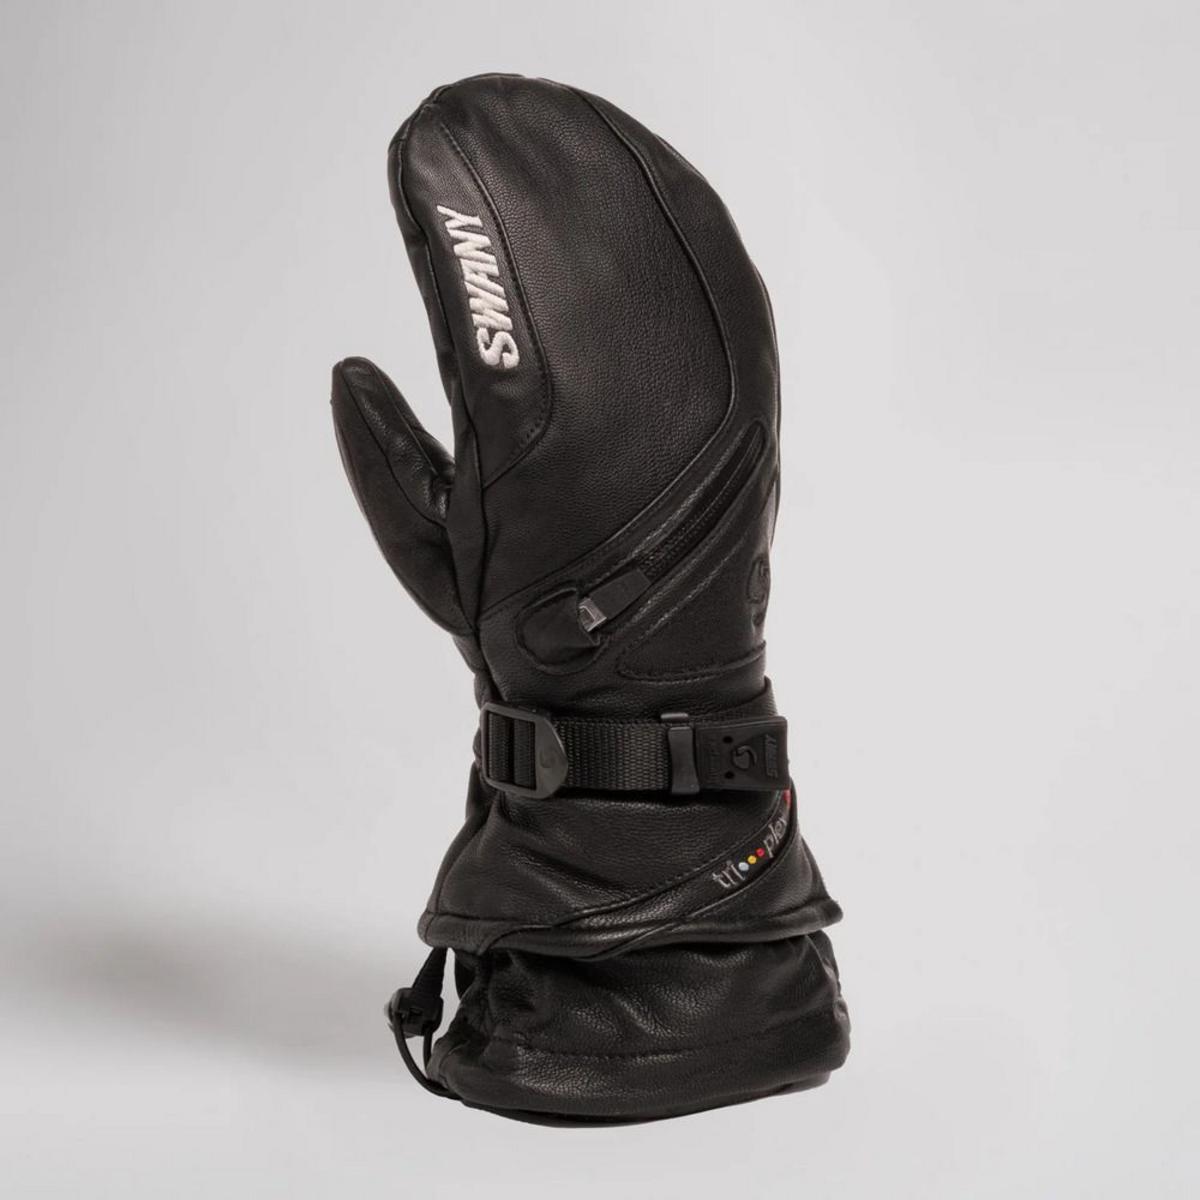 Swany Men's X-Cell Mittens 2.1